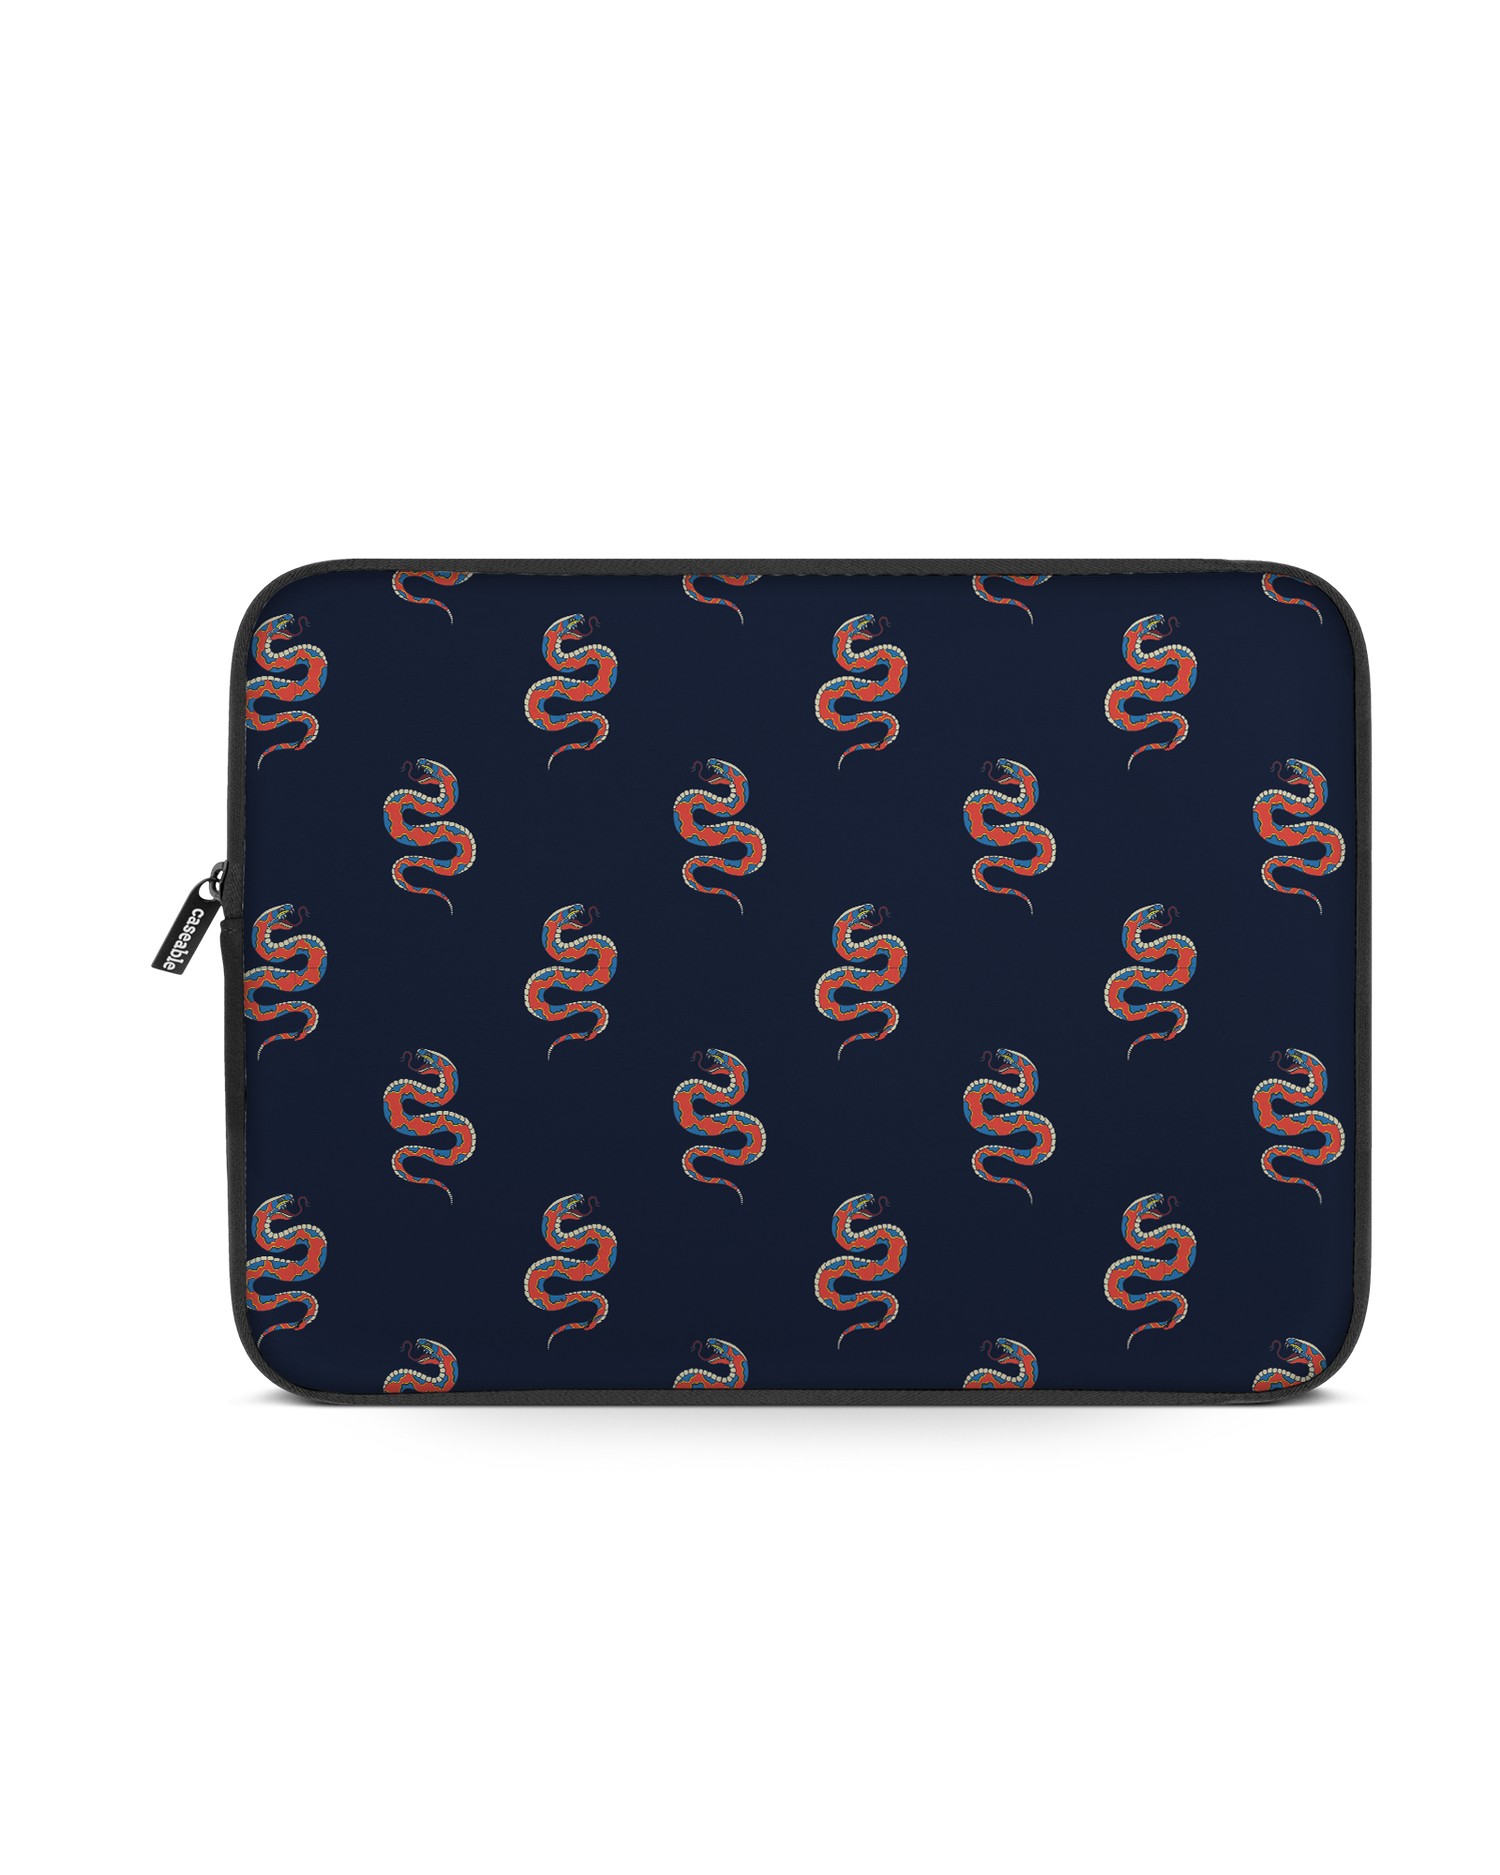 Repeating Snakes Laptop Case 13 inch: Front View